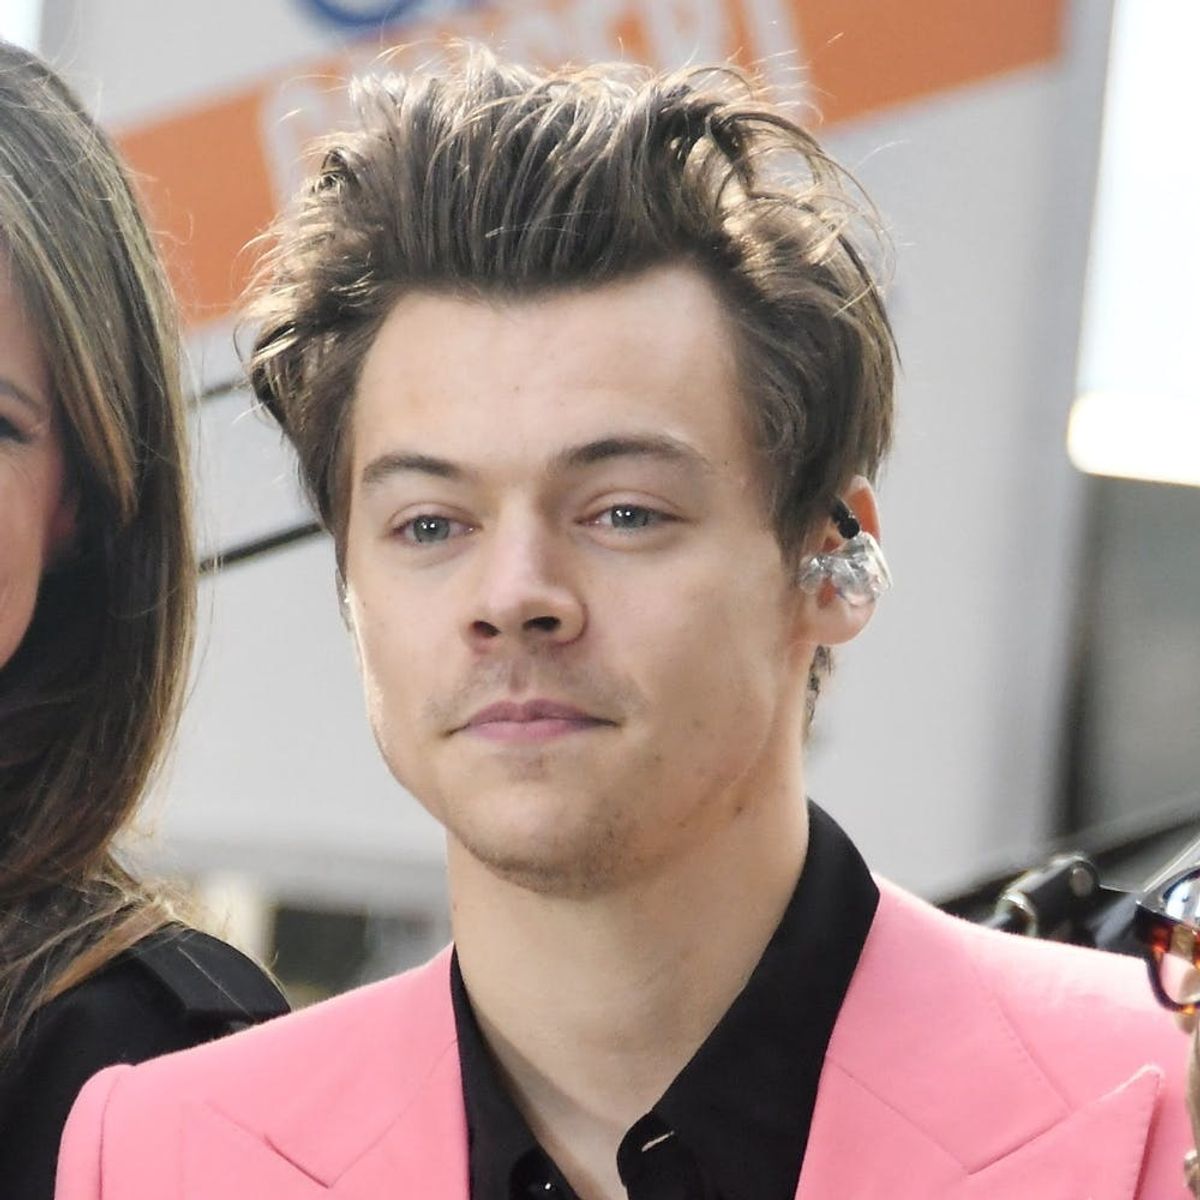 Harry Styles Made a Totally Unexpected Announcement About His Sexuality